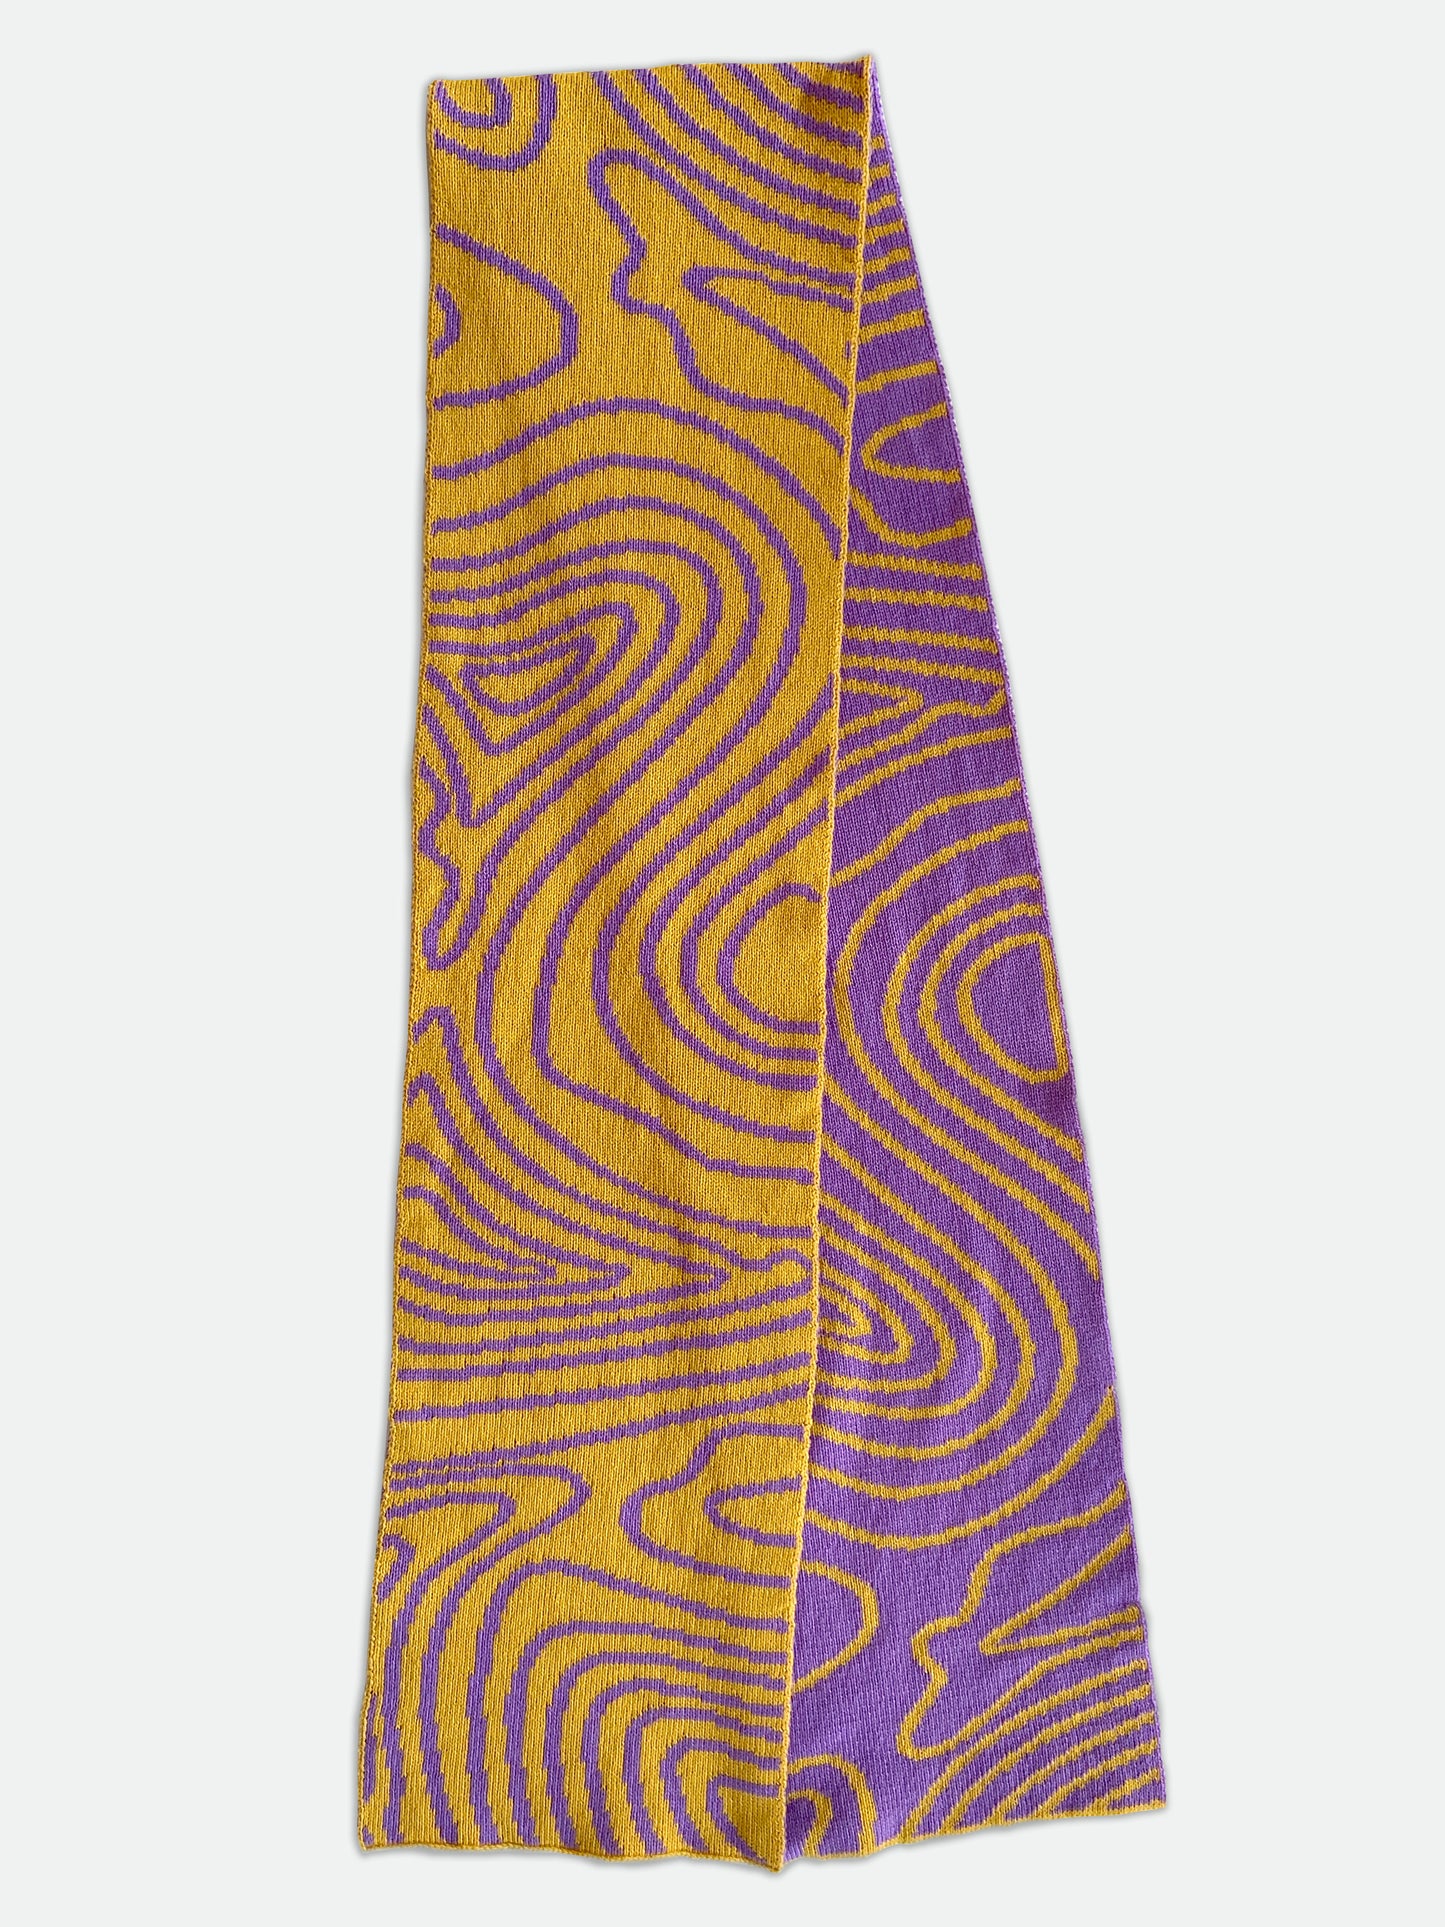 Swirly Stripe Wool and Cashmere Scarf in Purple and Orange Made to order